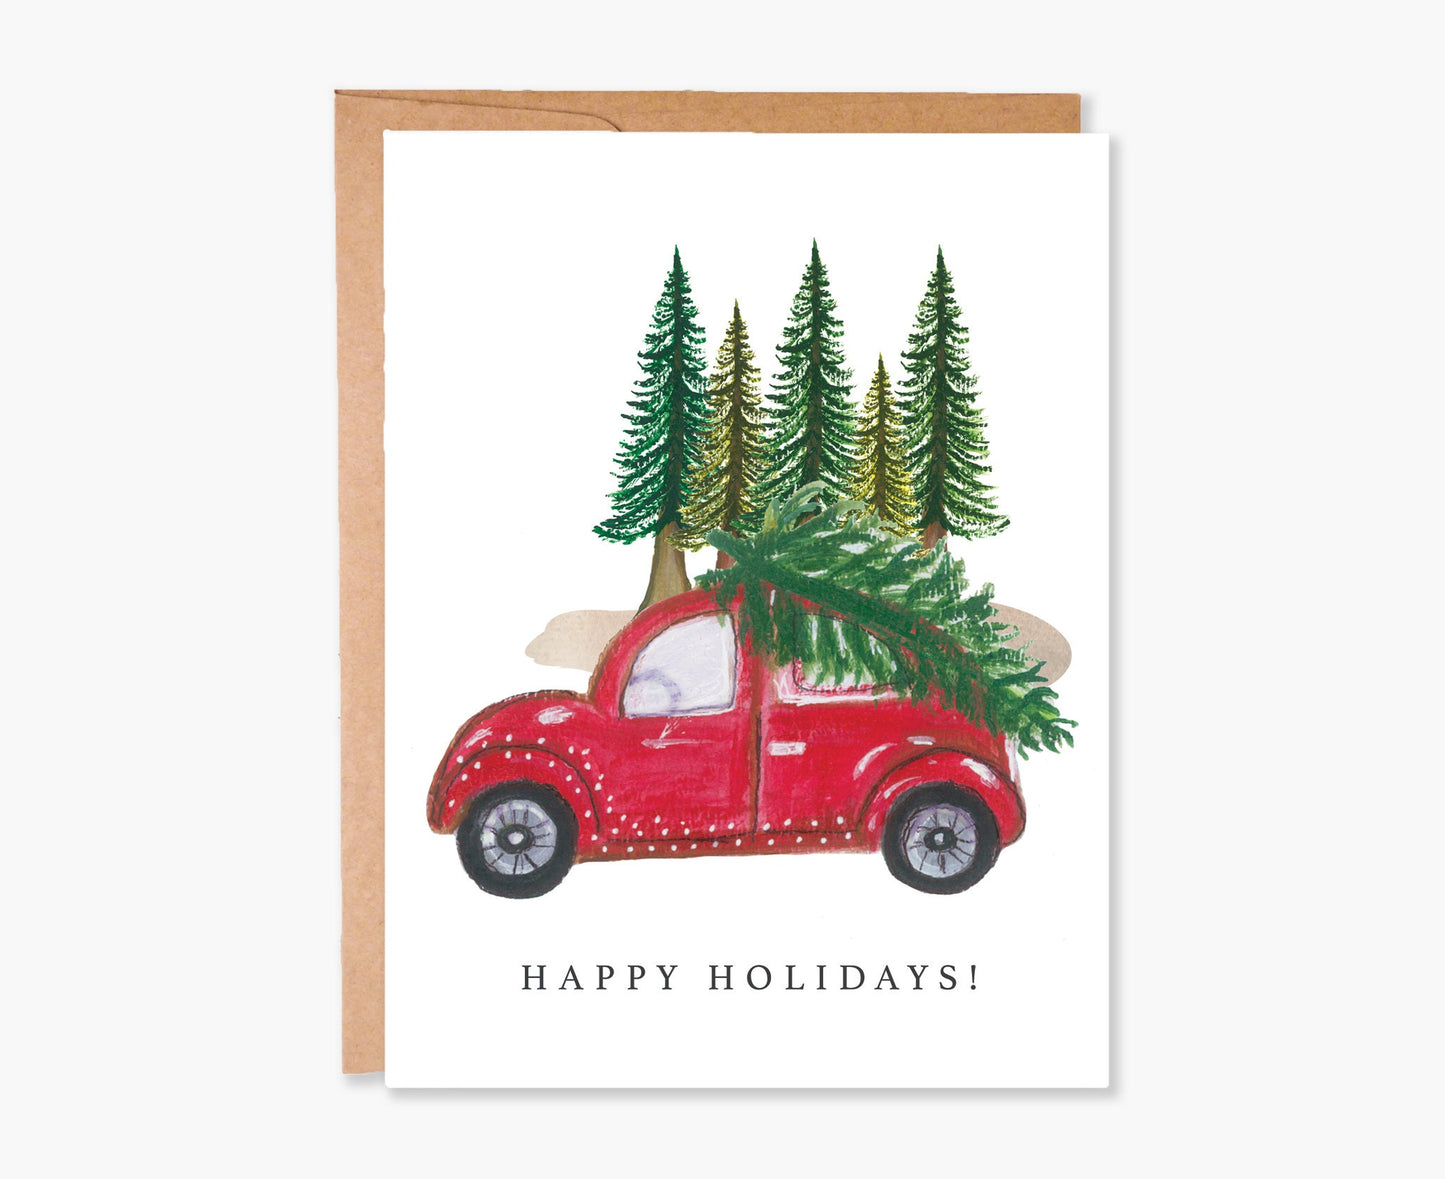 Holiday Card Set, Holiday Cards Pack, Happy Holidays Cards, Christmas Blank Cards, Christmas Greeting, Pine Tree Card, Item Code: COTC H27